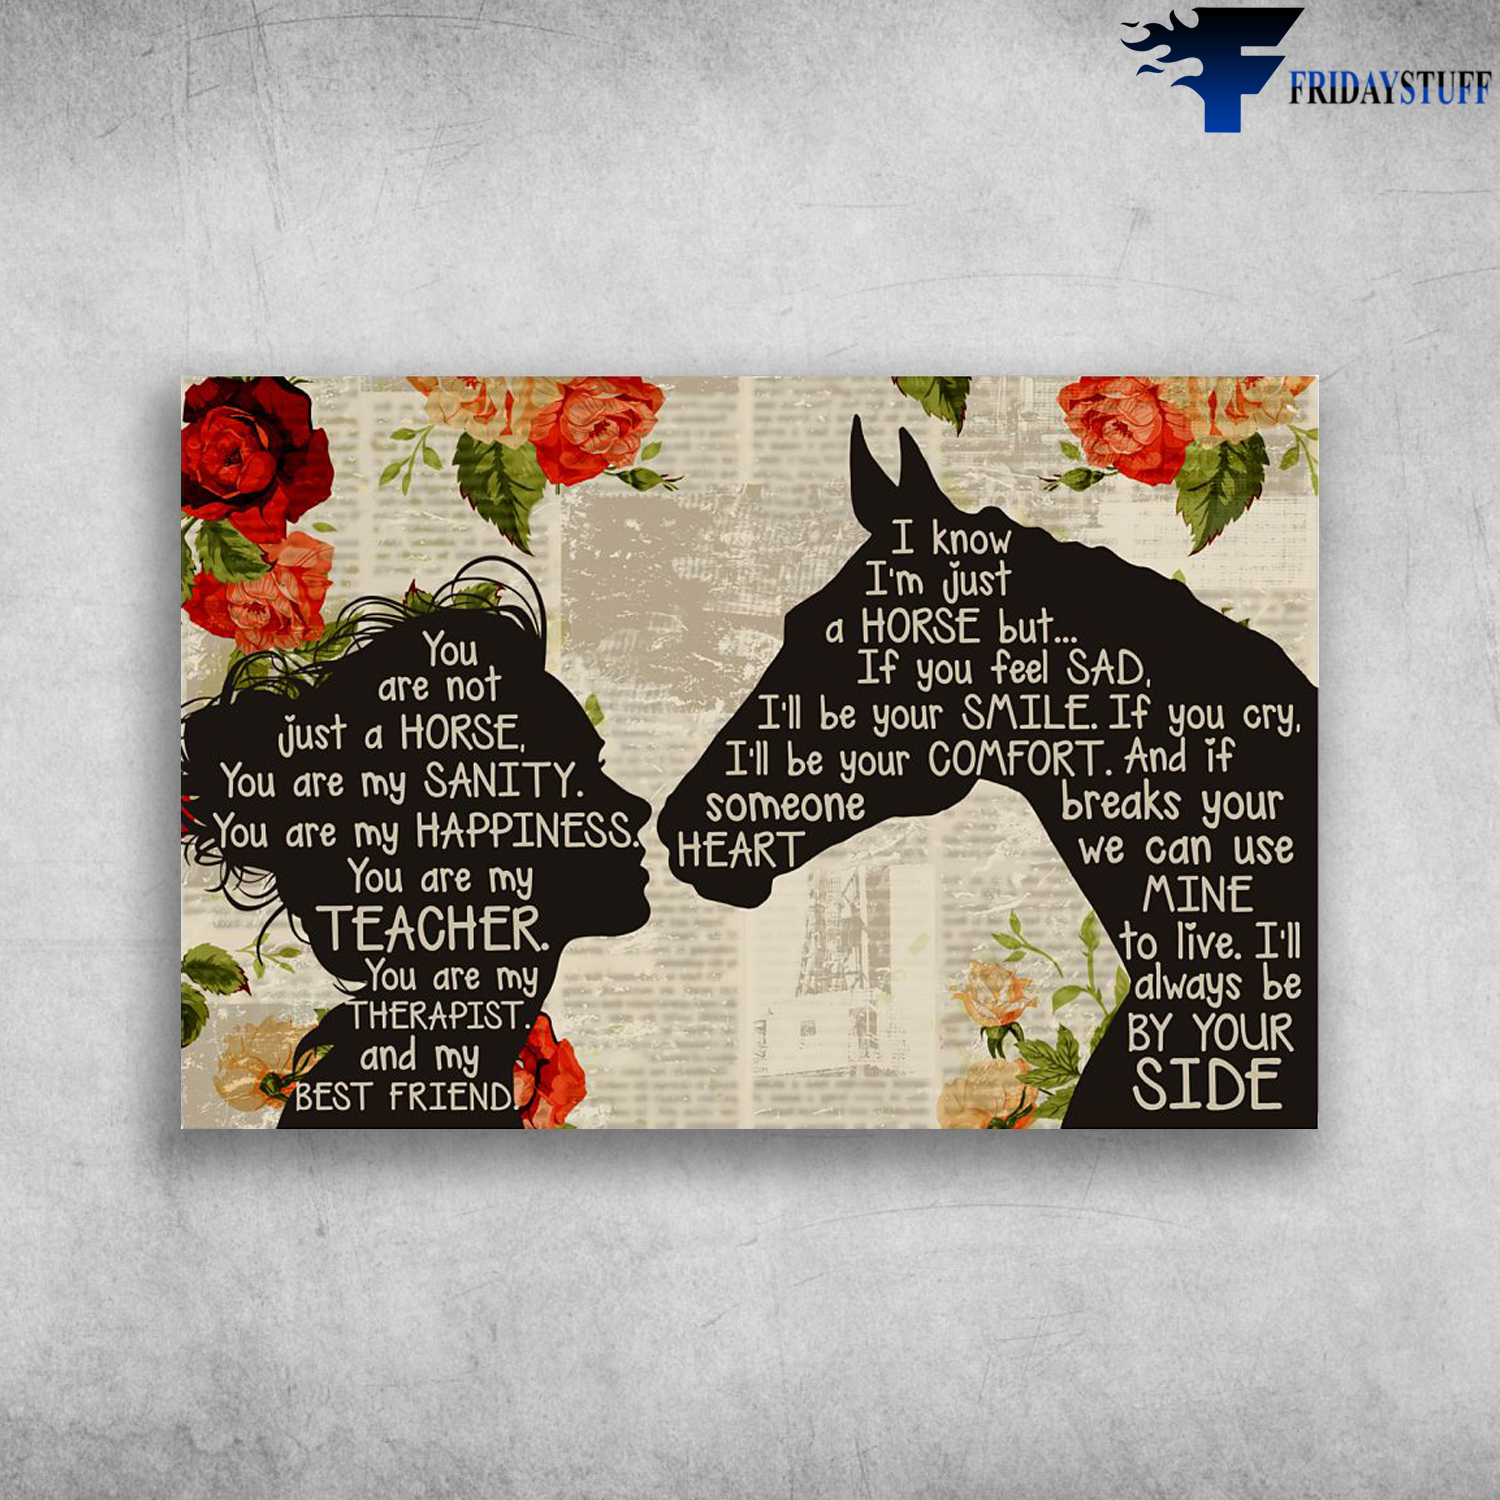 Girl Loves Horse - You Are Not Just A Dog, You Are My Sanity, You Are My Happiness, You Are My Teacher, You Are My Therapist, And My Best Friend, I Know I'm Just A Horse But, If You Feel Sad